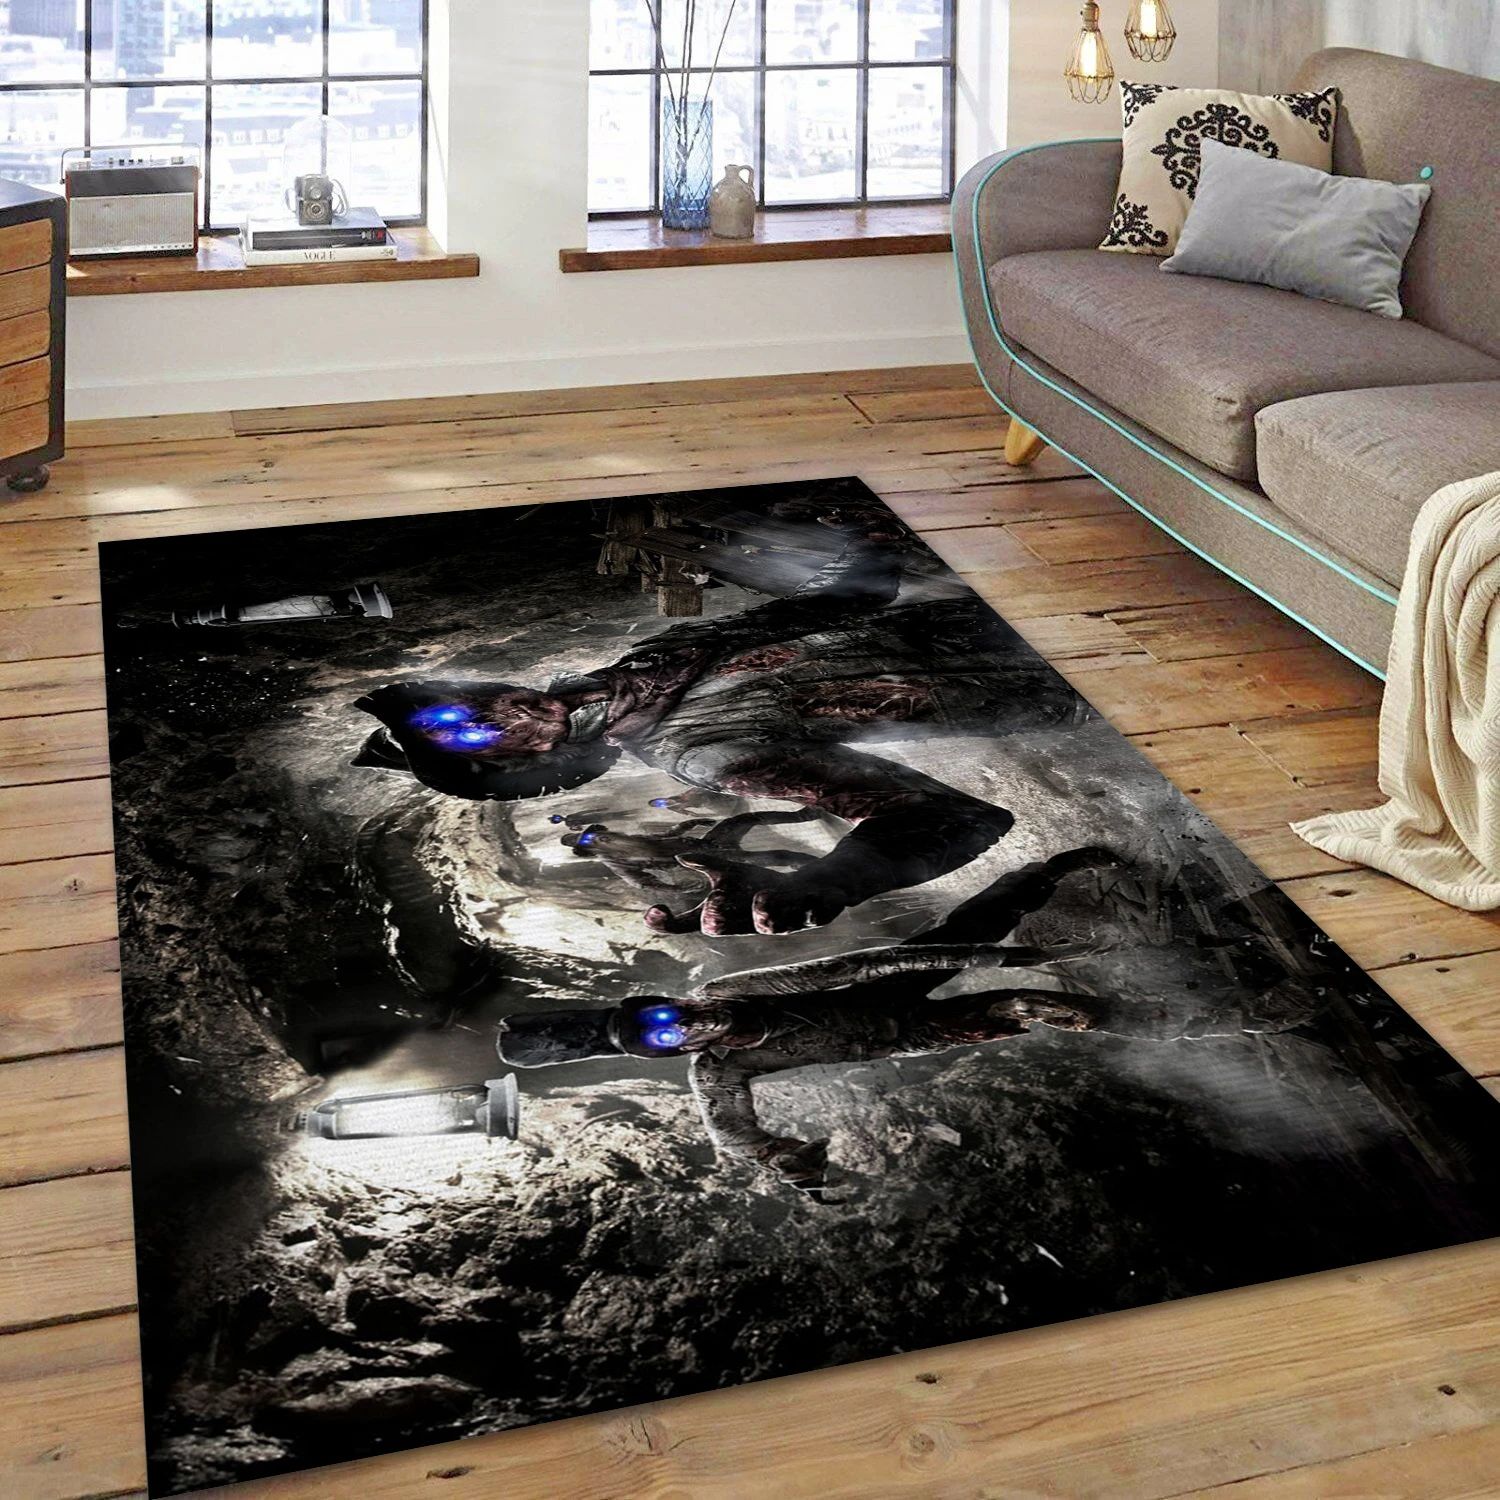 Call Of Duty Black Ops Ii Video Game Area Rug For Christmas, Area Rug - Home Decor Floor Decor - Indoor Outdoor Rugs 1